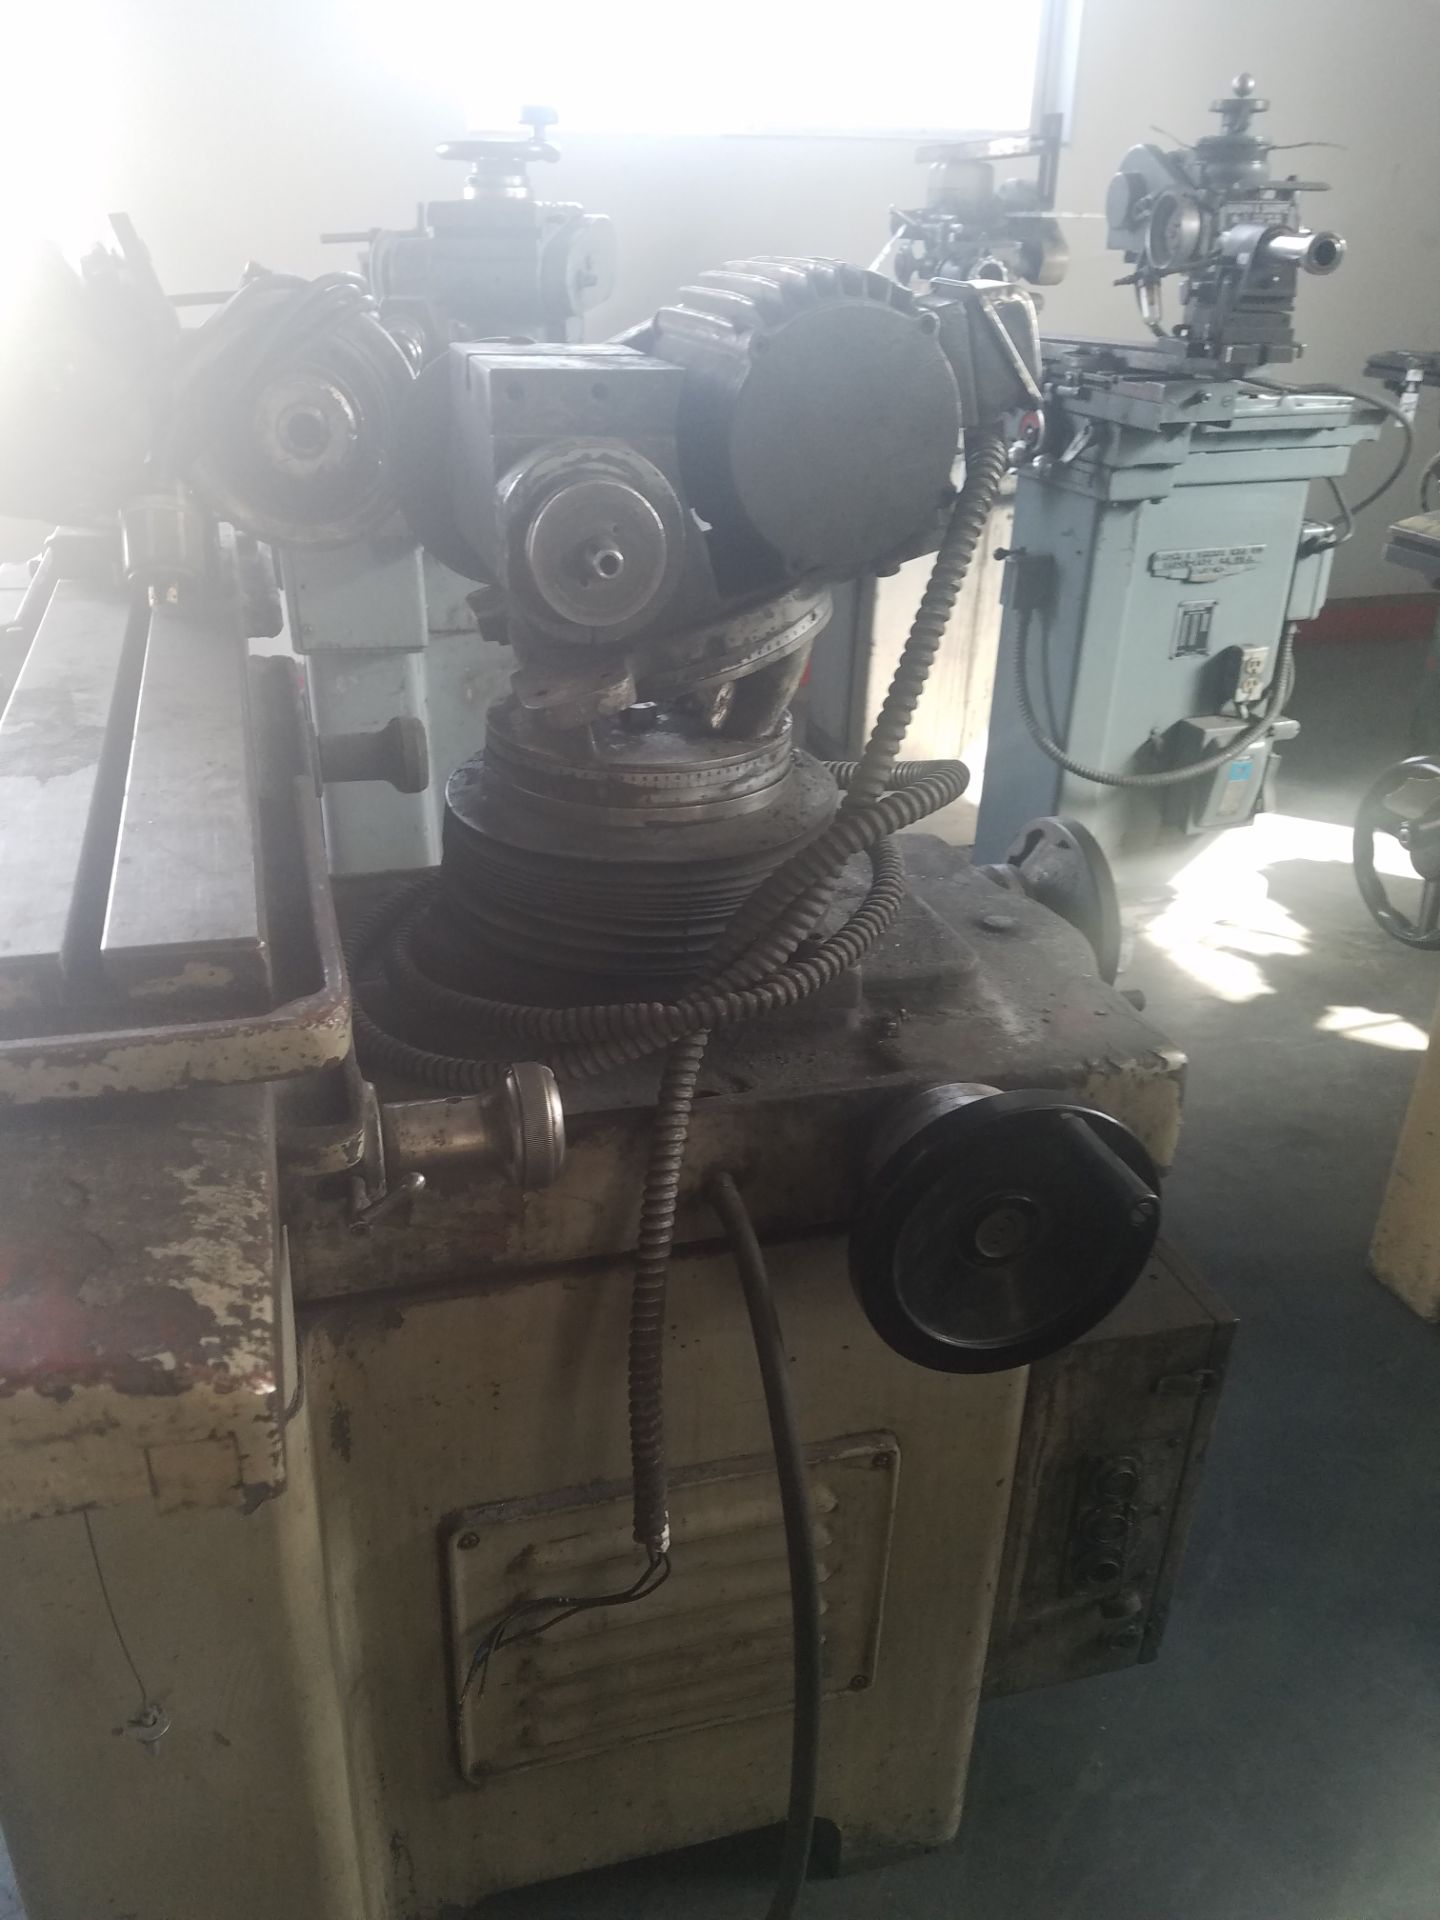 1989 Jet Mod, JCG-638 Cutter & Tool Grinder 37"x5 1/2" Bed, 2 Spindle Head - Image 6 of 7